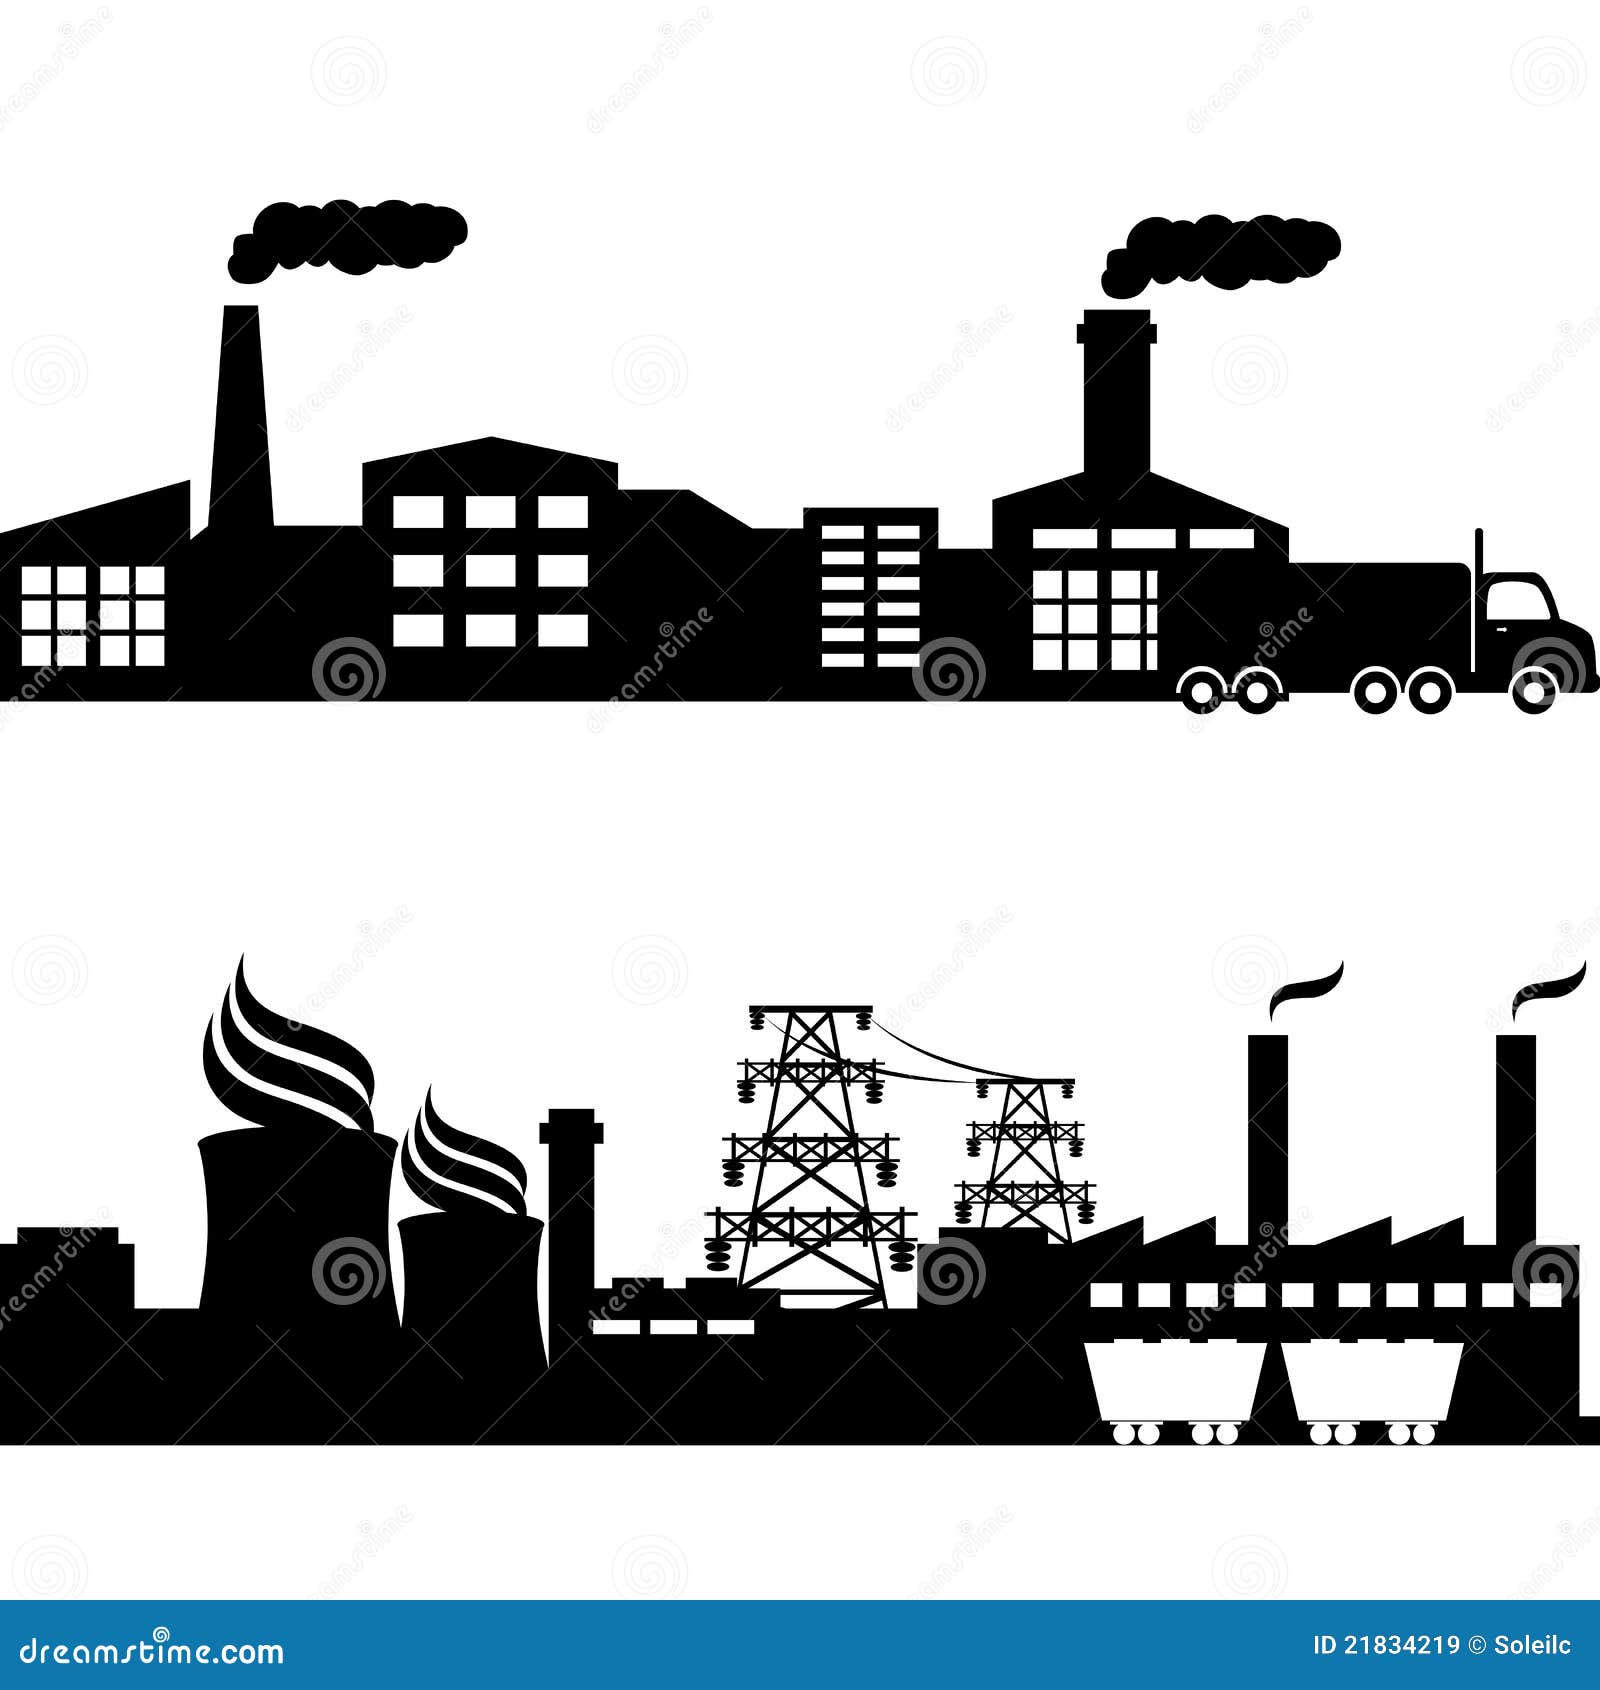 industrial clipart free download - photo #21